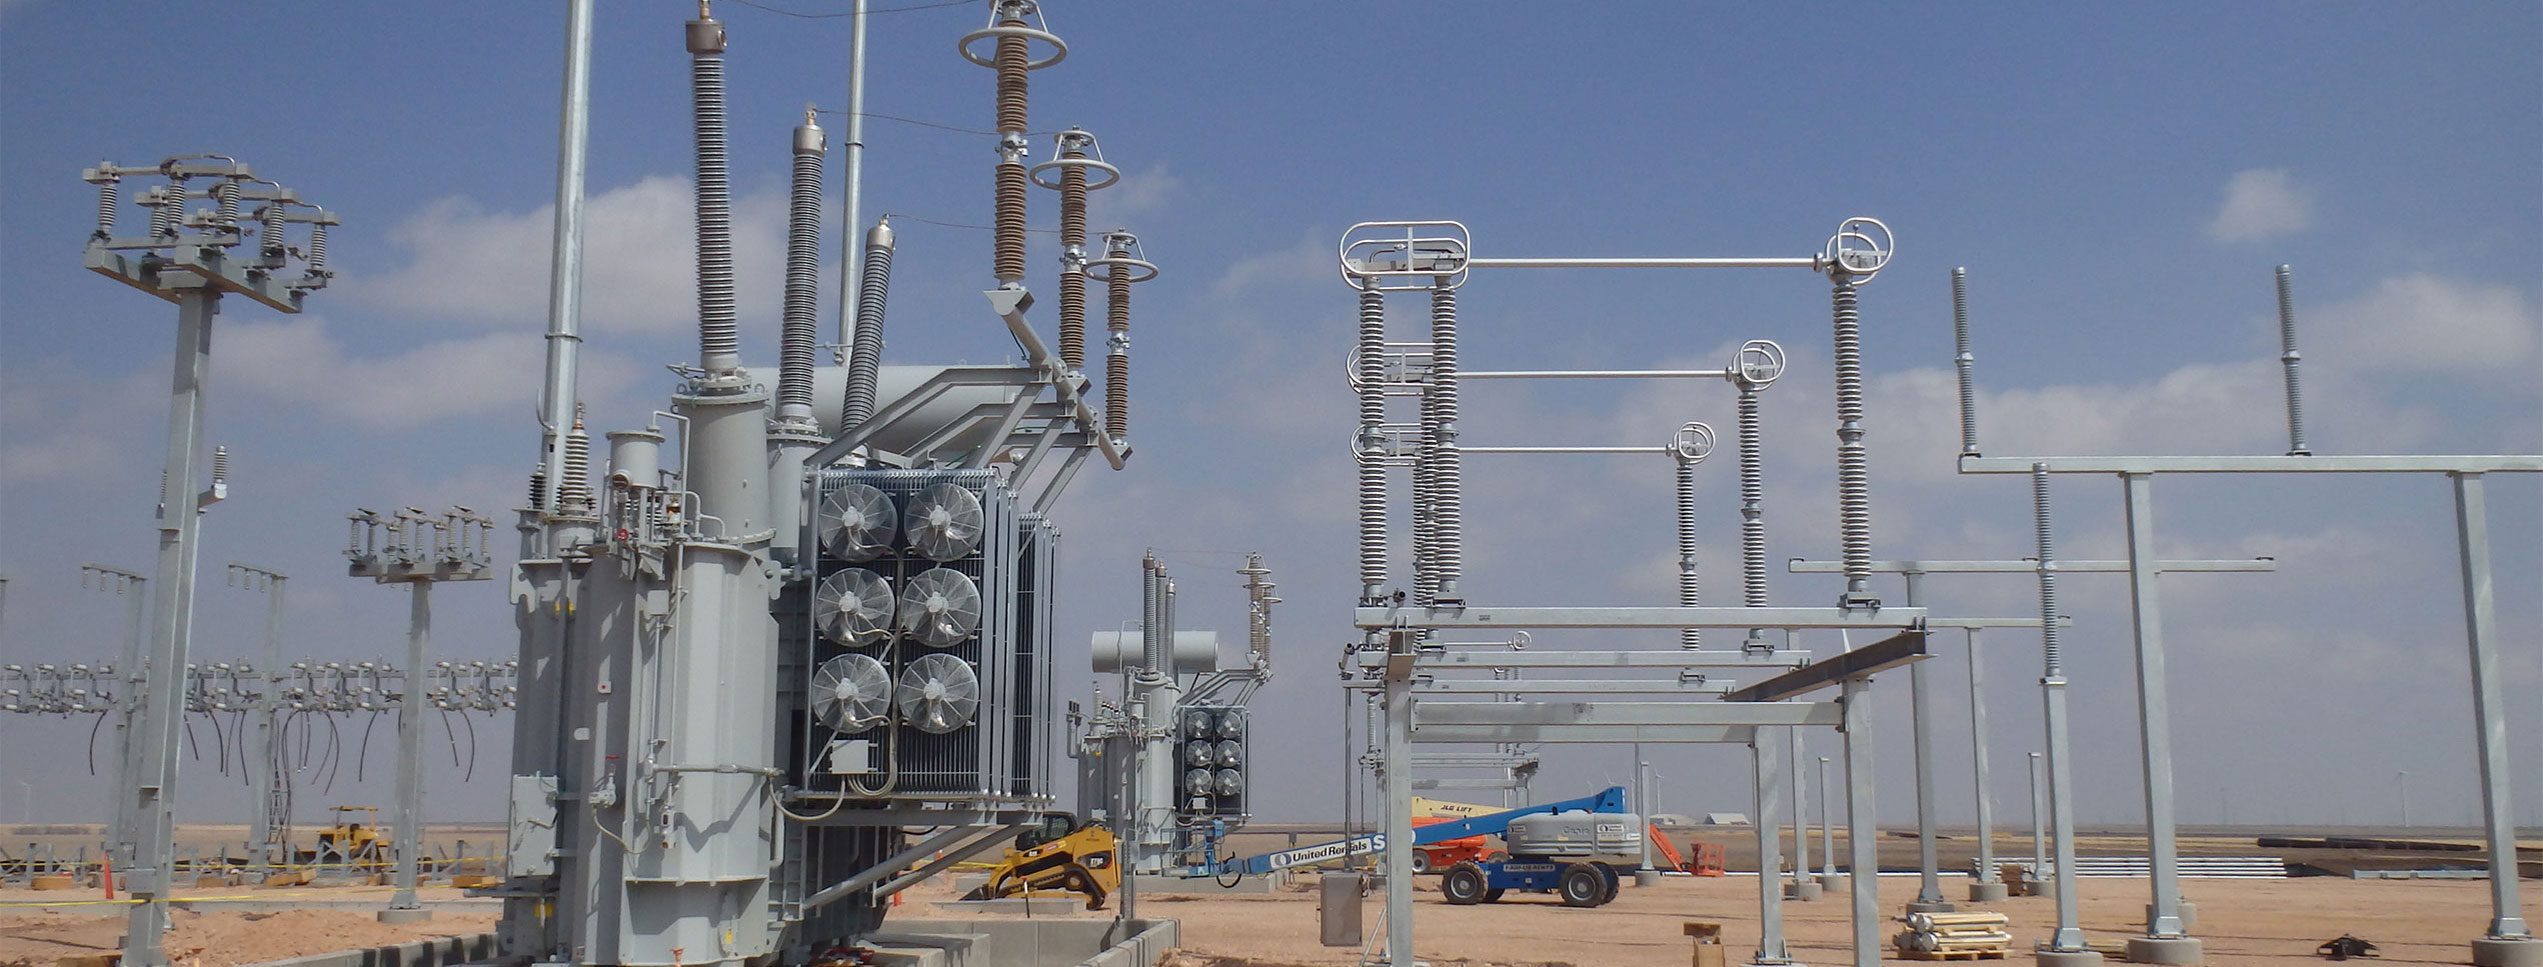 substation and transmission project construction site